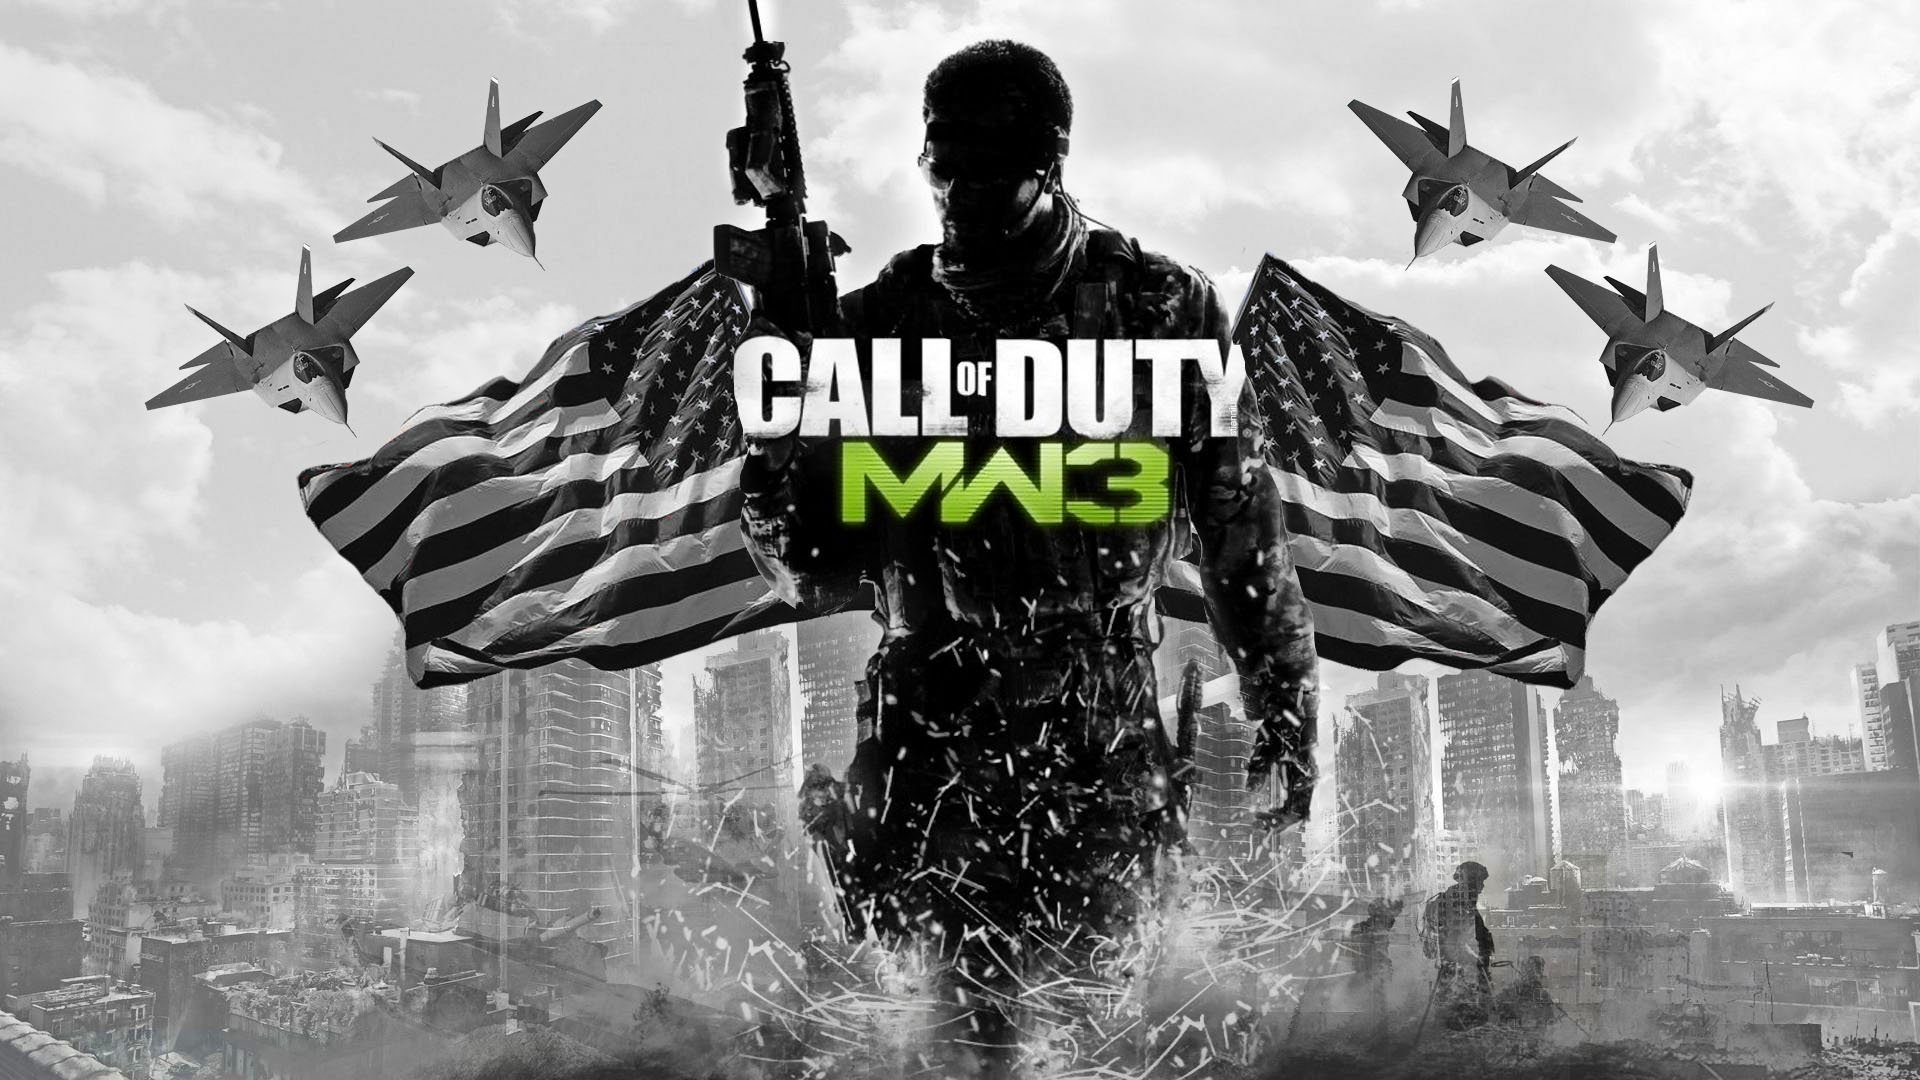 Call Of Duty Wallpaper Hd Wallpapers Download 1920x1080